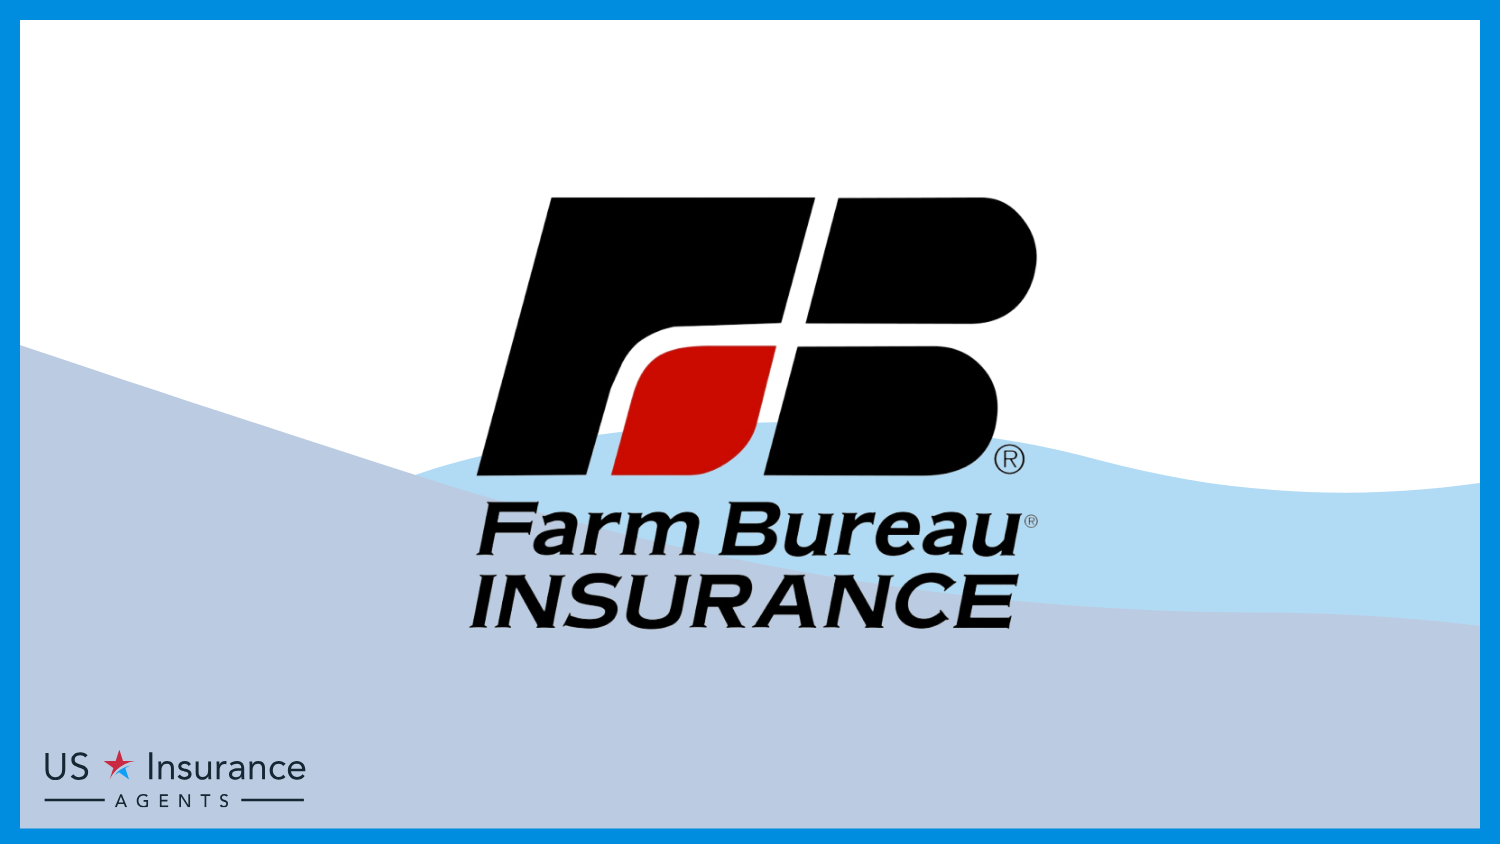 Farm Bureau: Best Business Insurance for Equine Therapy Companies